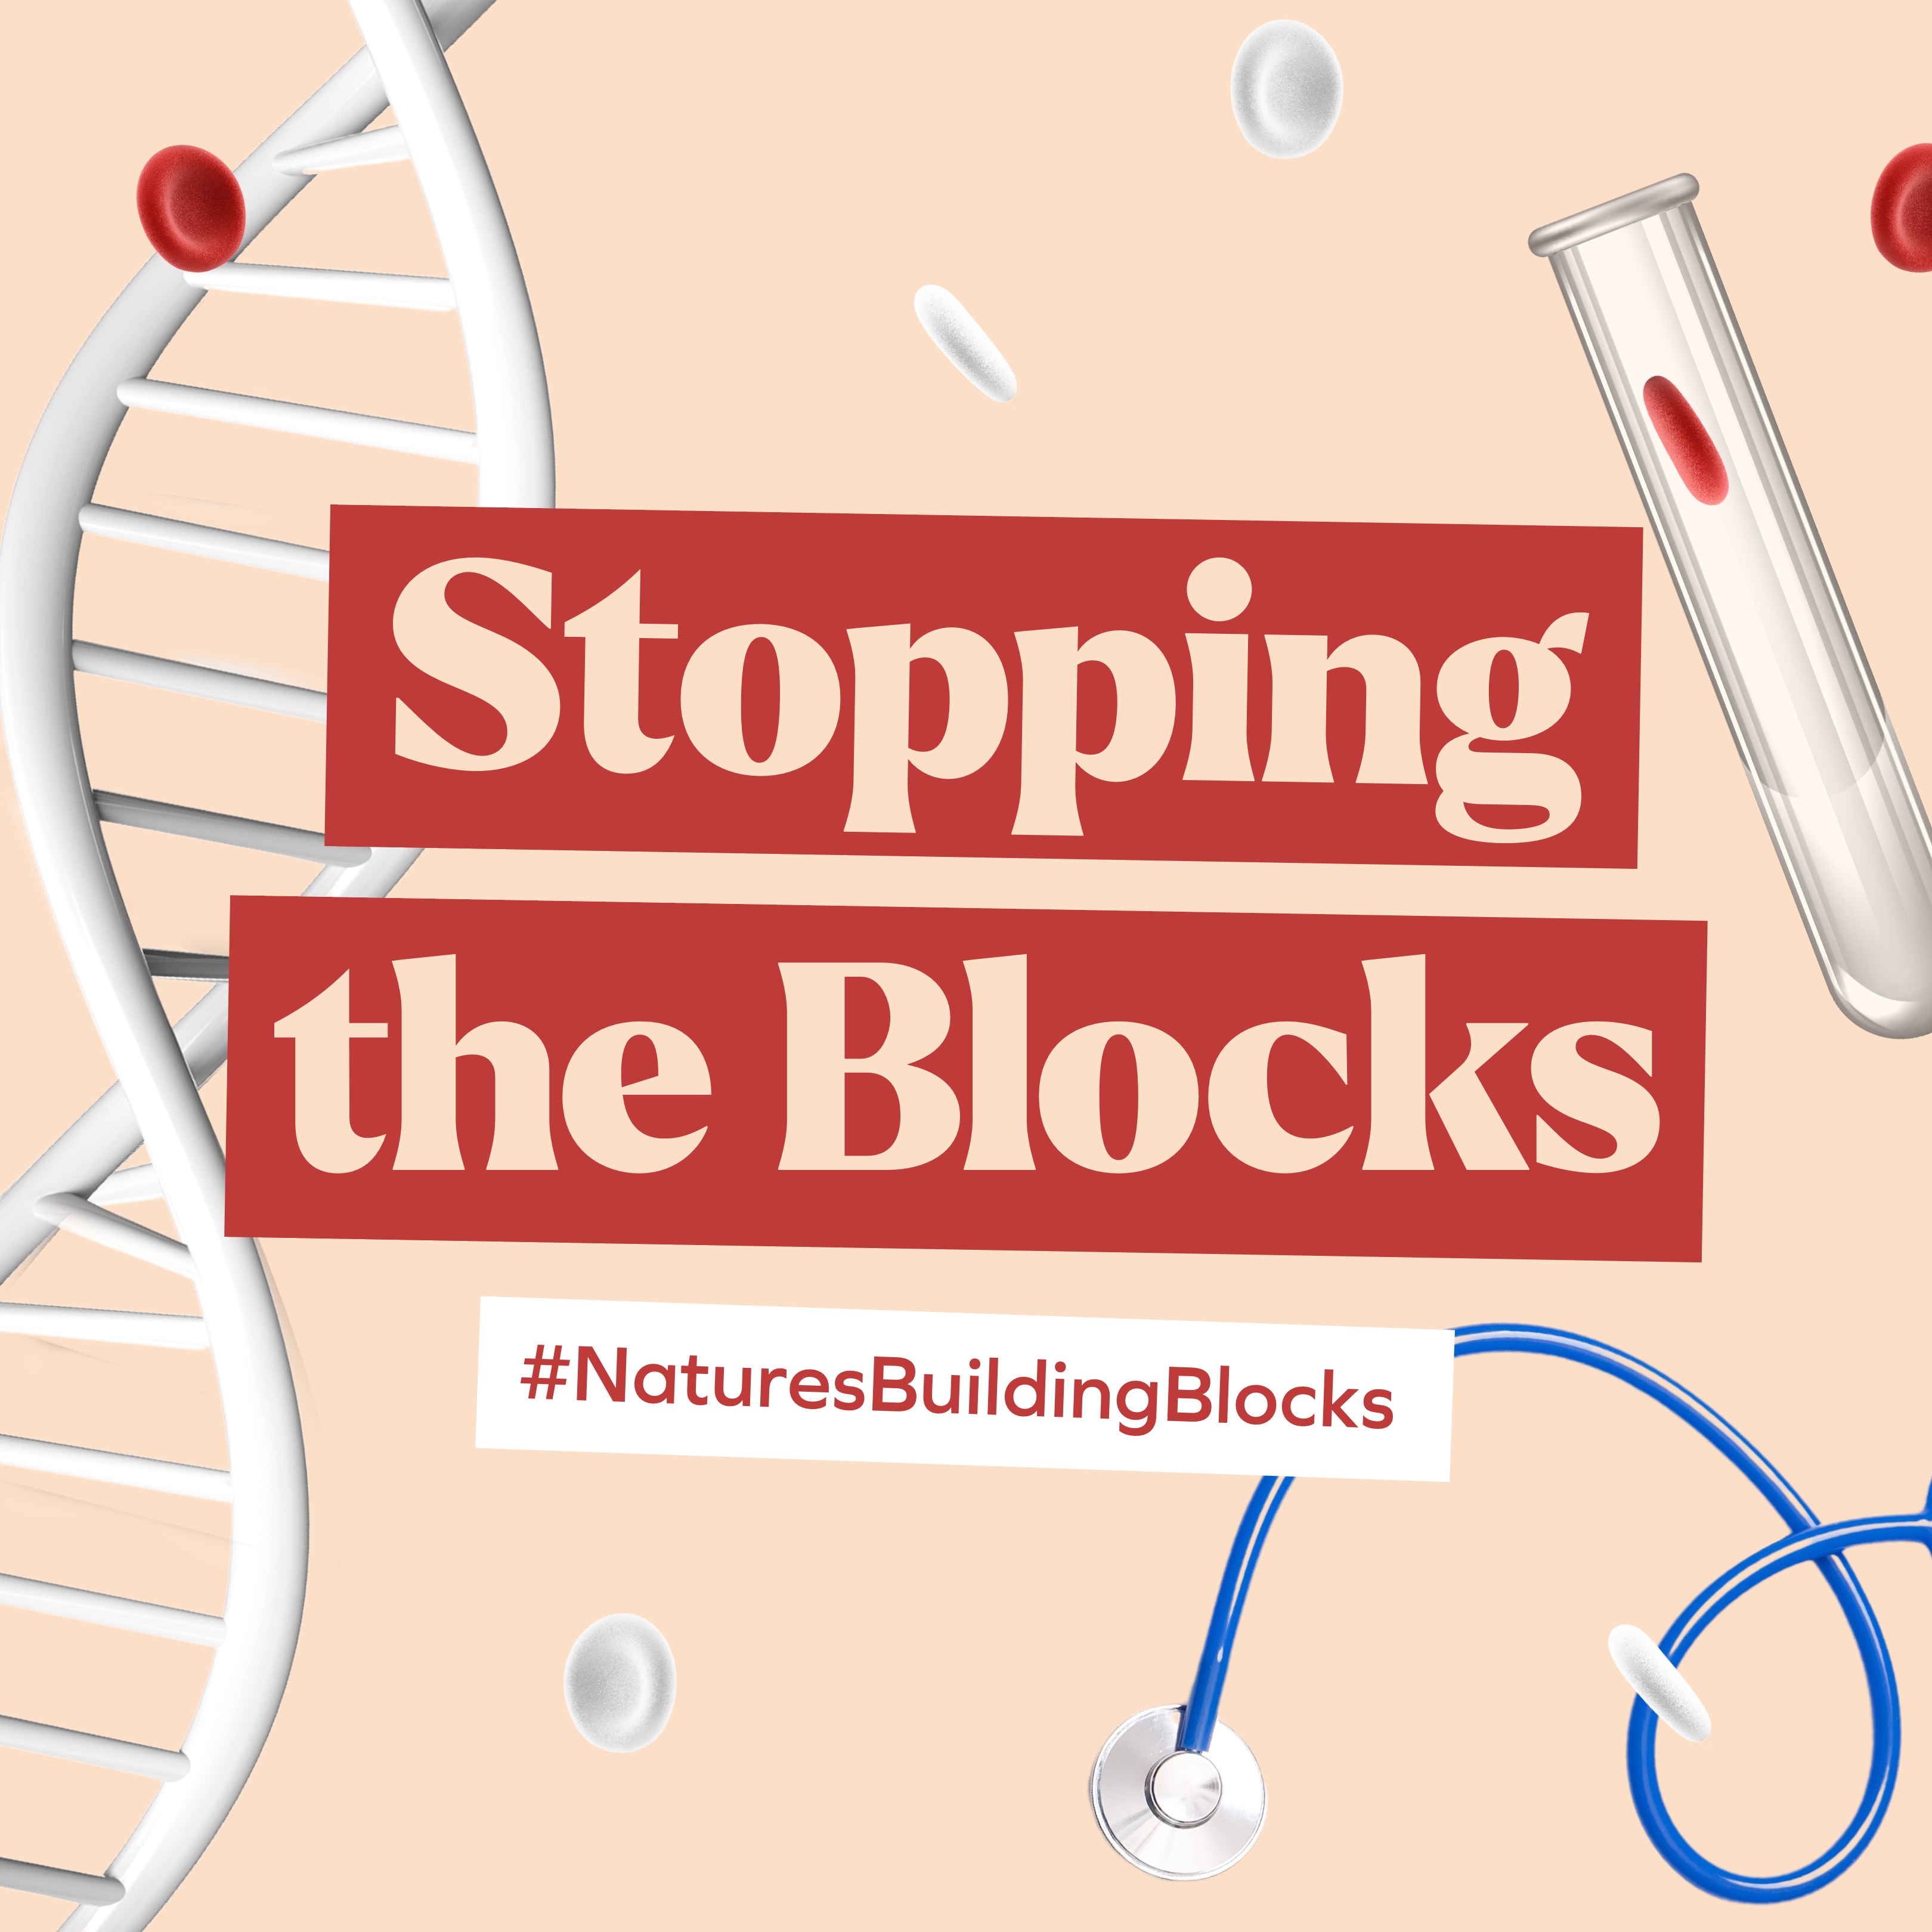 Stopping the blocks